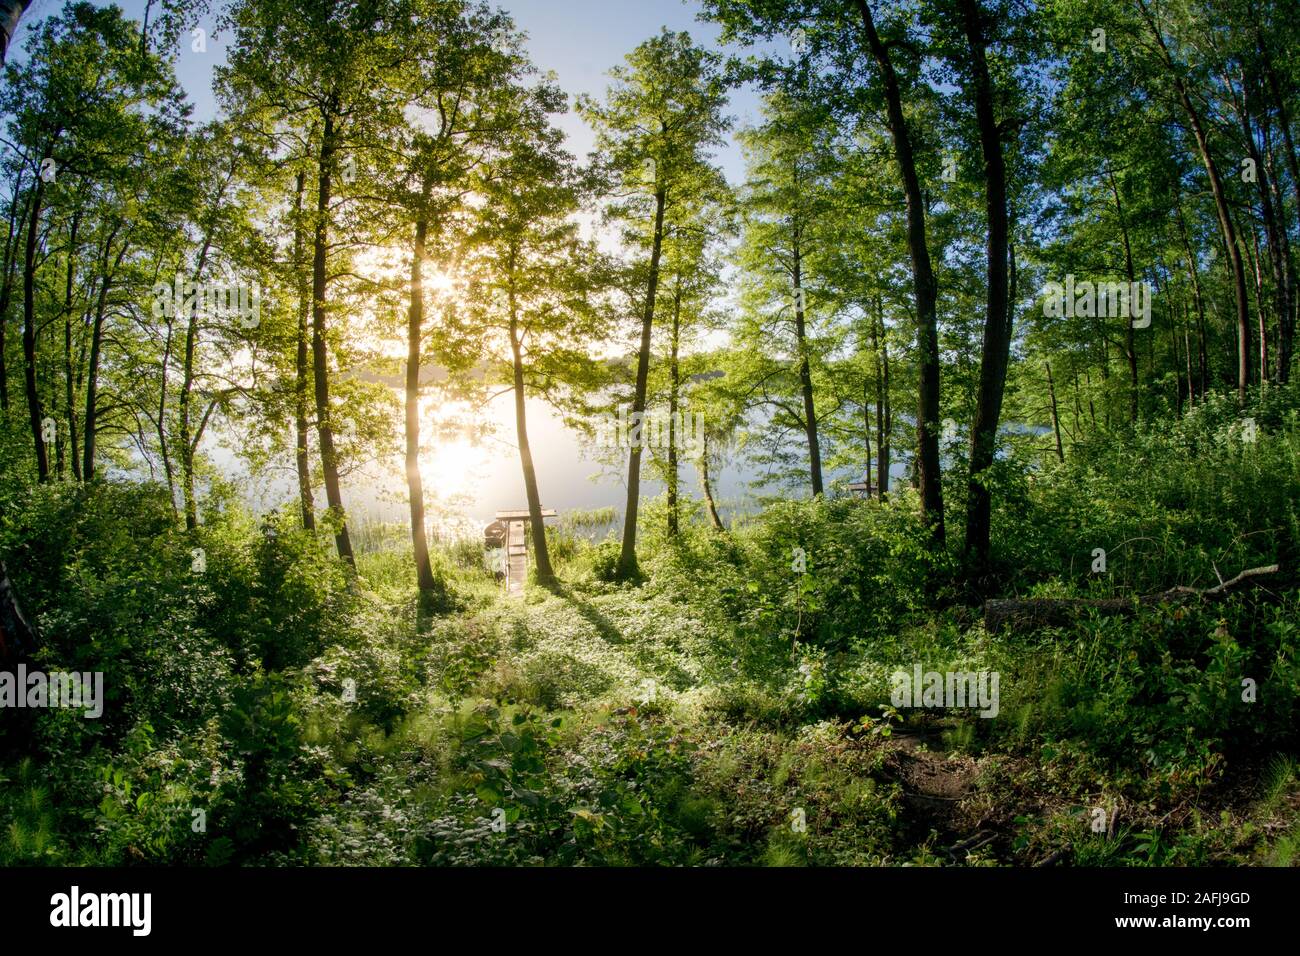 Natural forest in the warm light of the morning sun Stock Photo